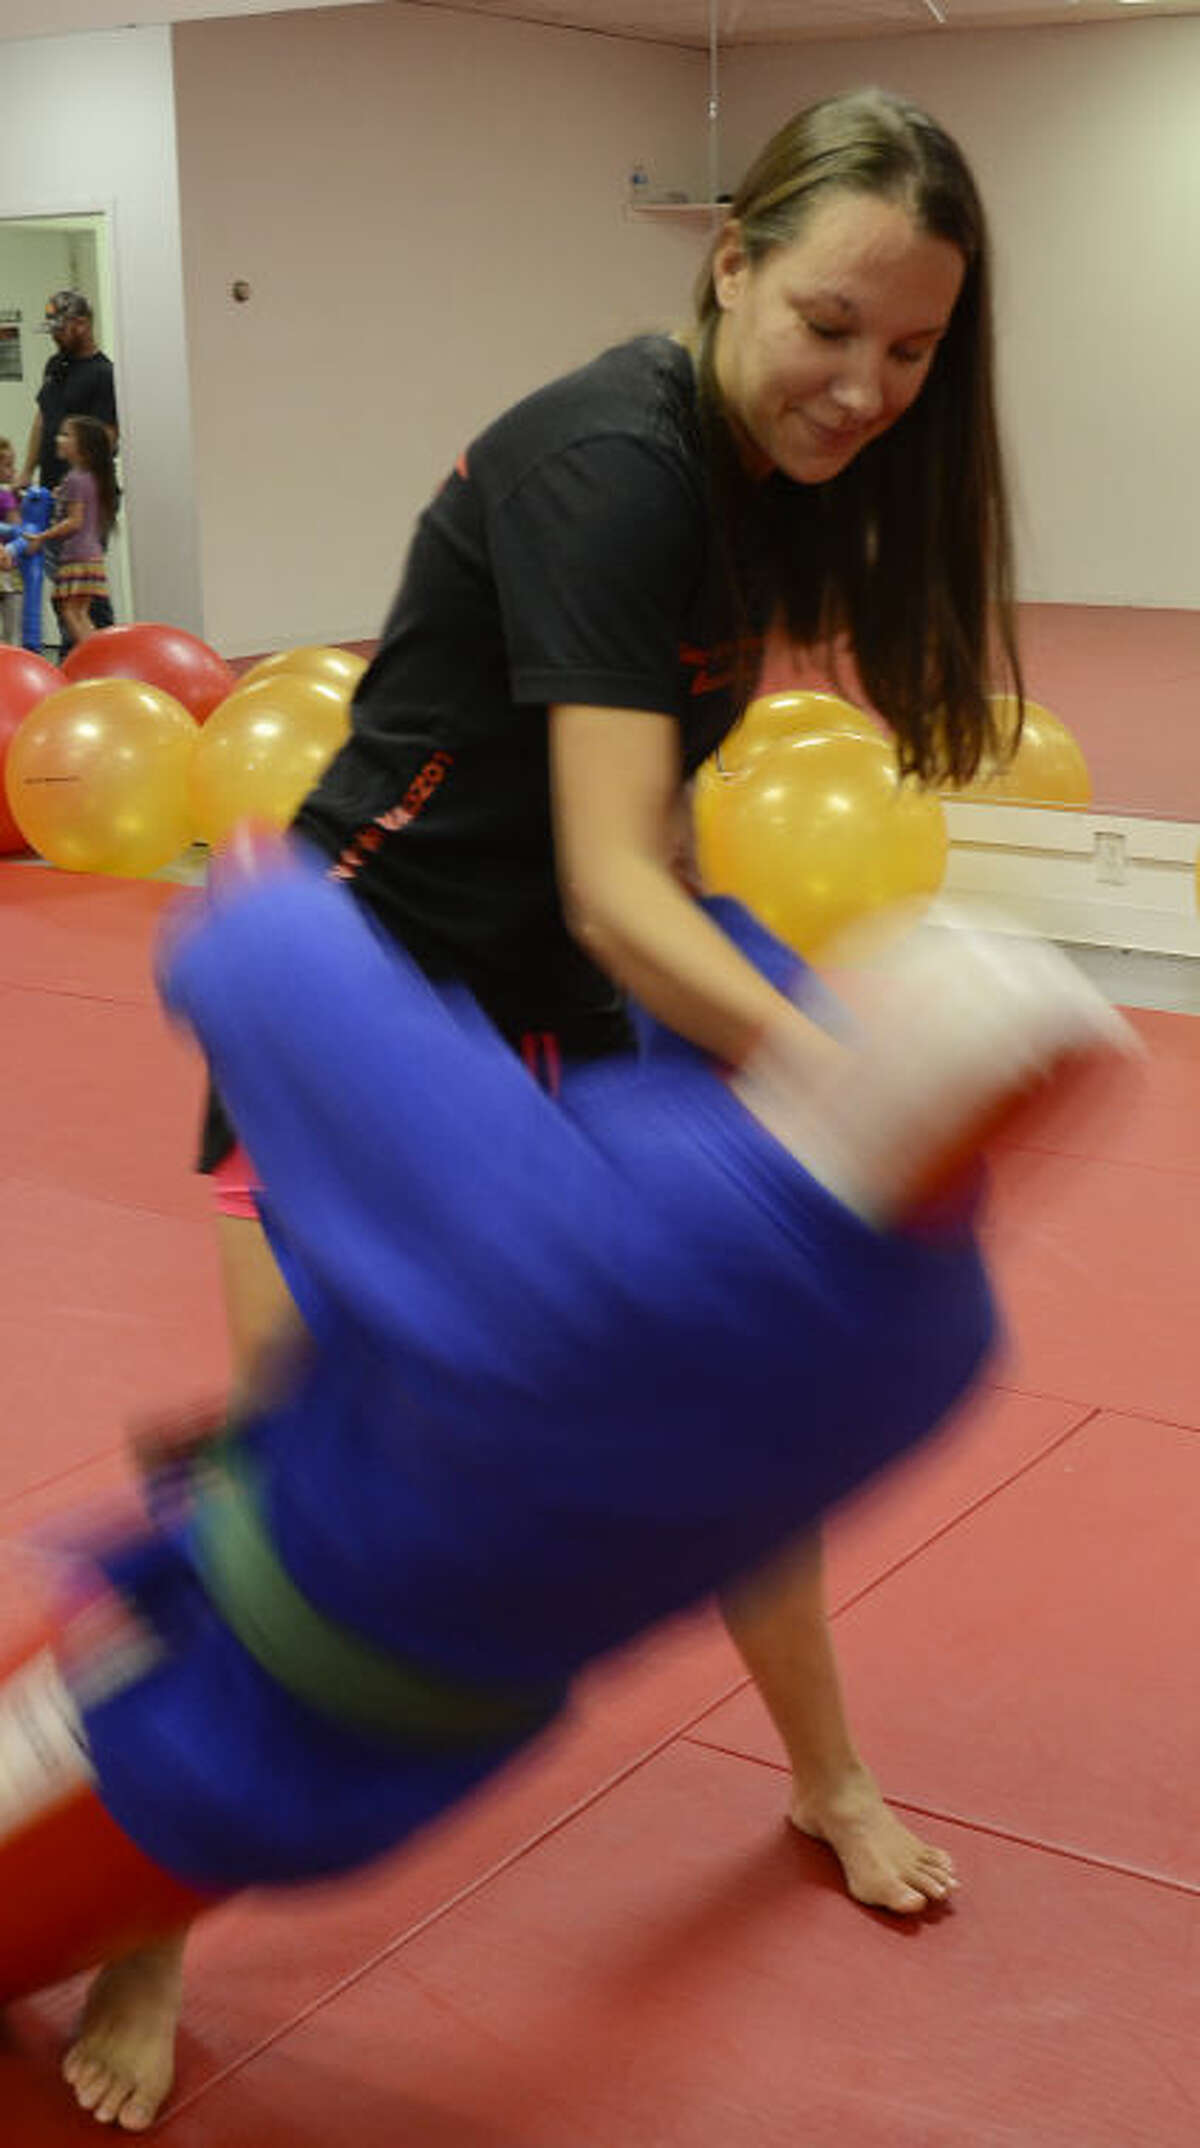 Tosha West, who suffers from muscular dystrophy, has started taking Brazilian jiu jitsu and seen a vast improvement in her muscular condition and balance. Tim Fischer\Reporter-Telegram